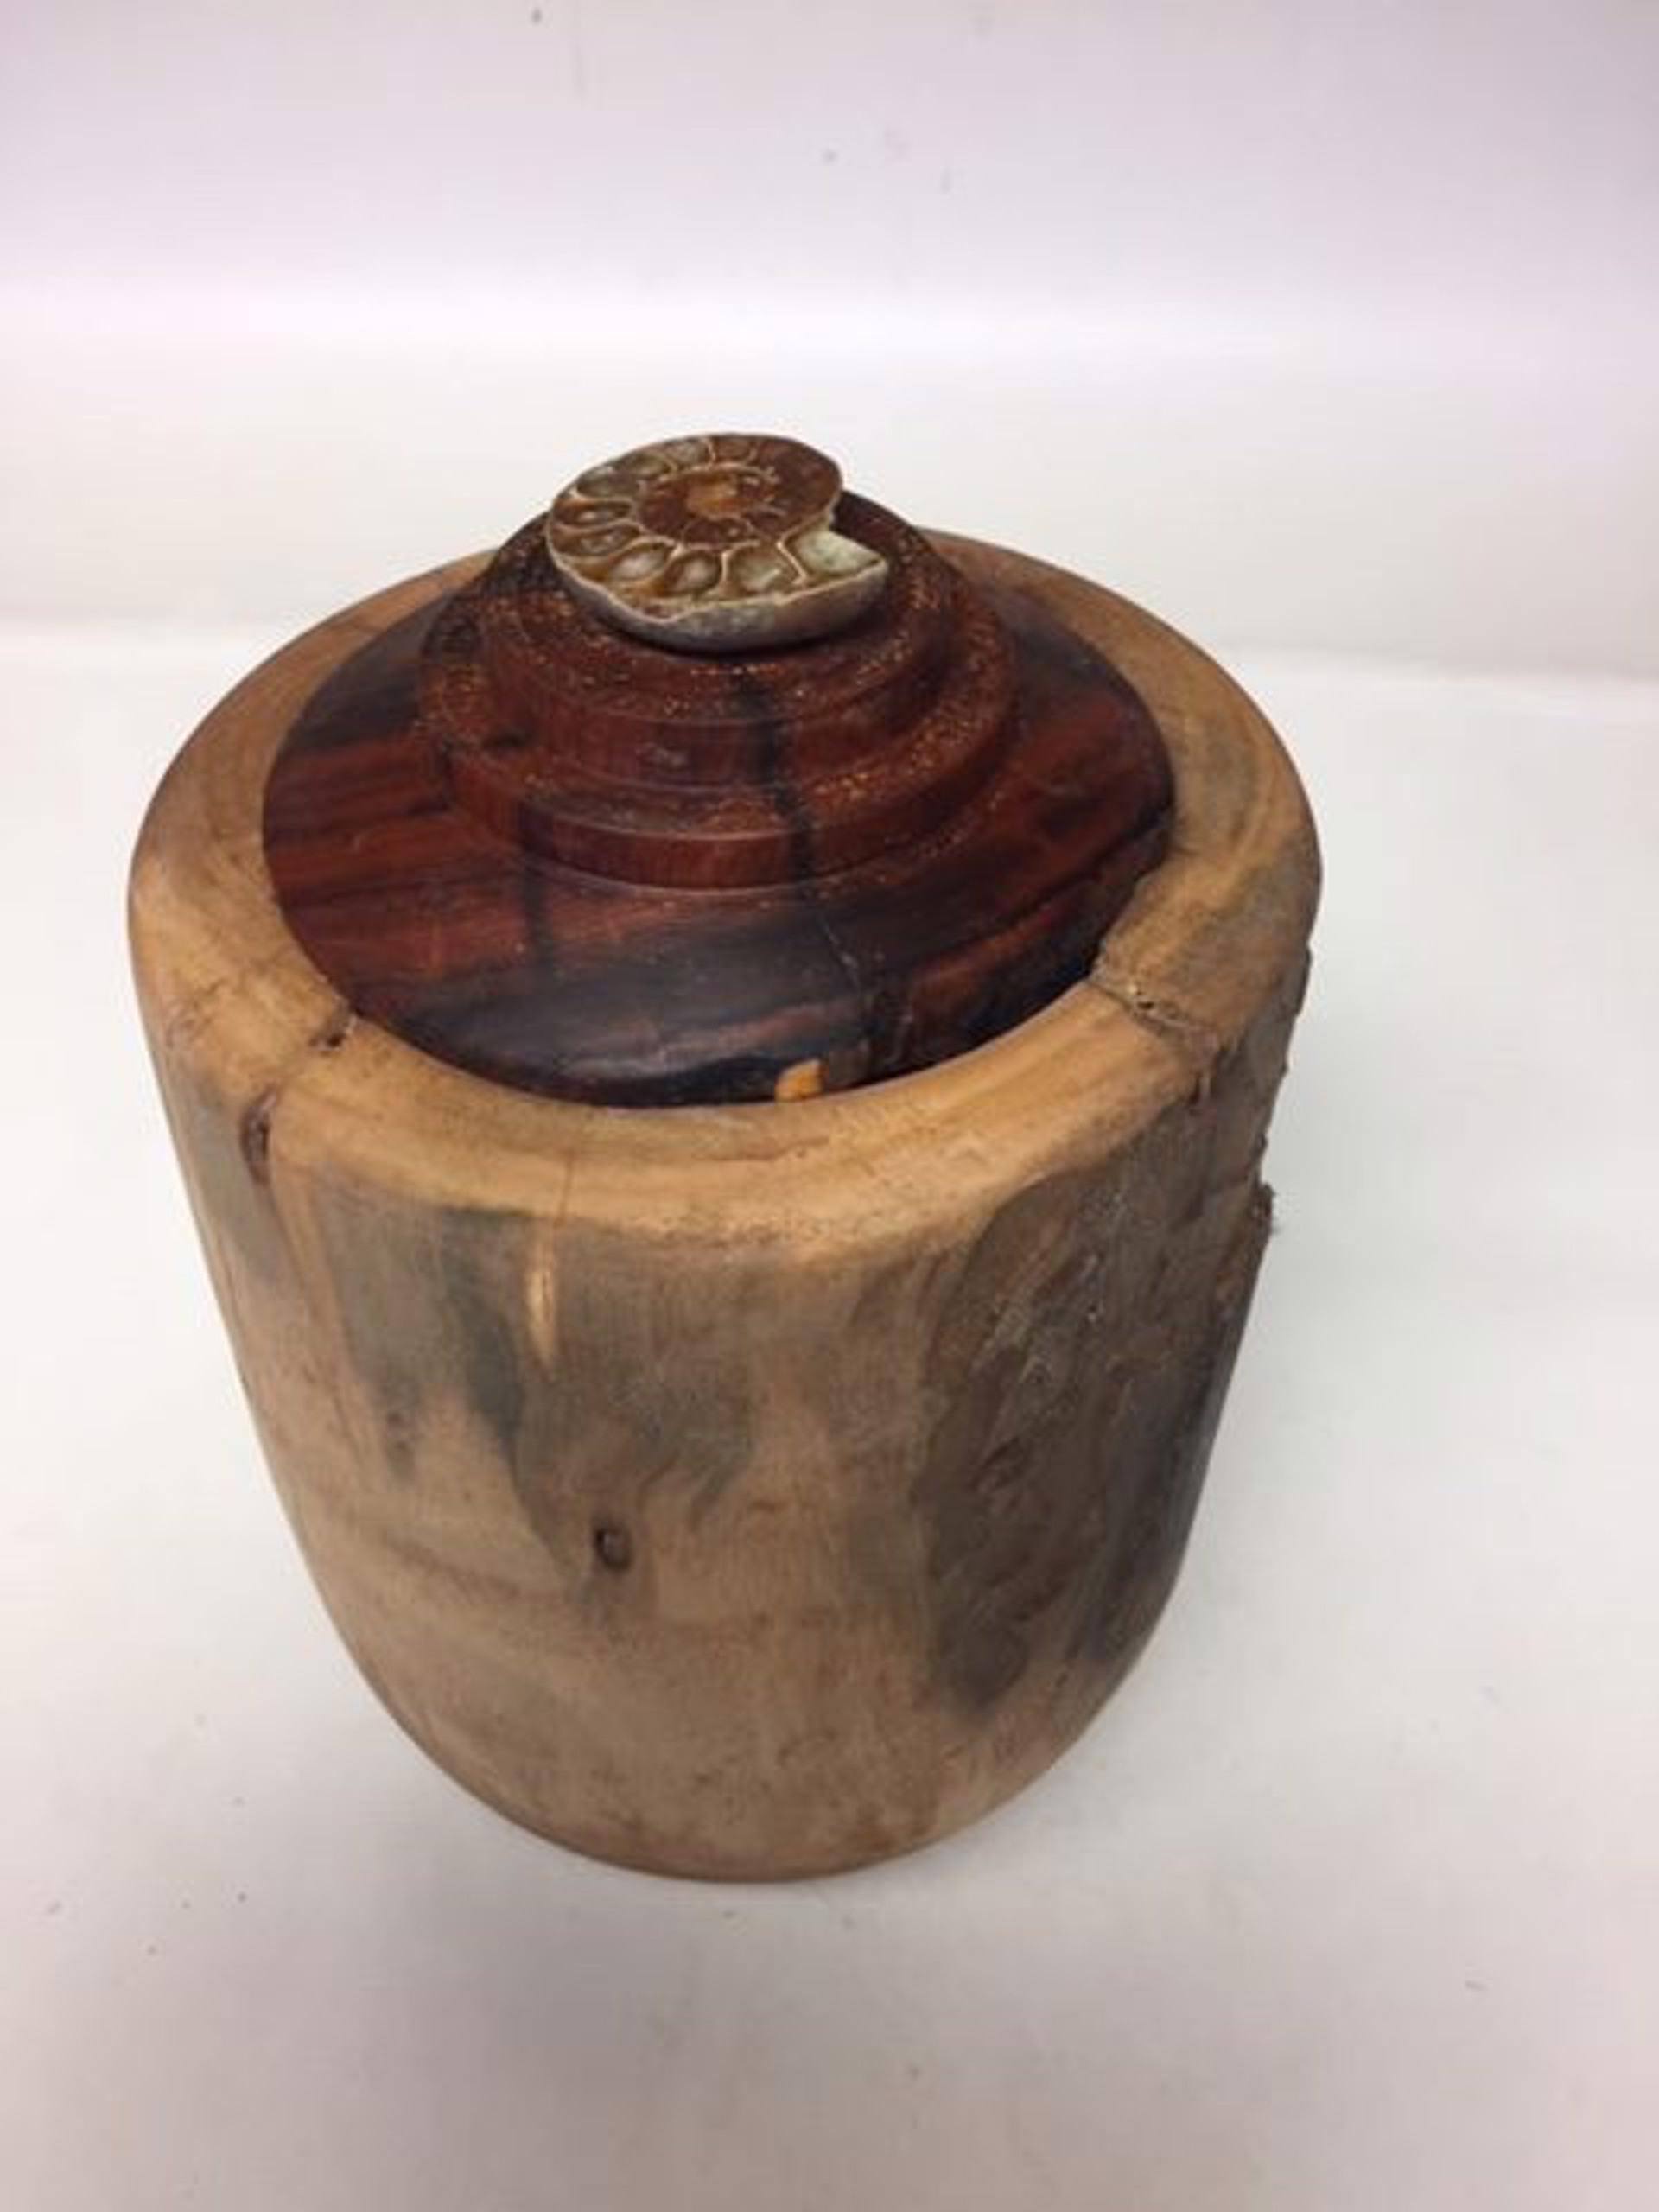 Turned Wood Jar W/Lid #20-36 by Rick Squires